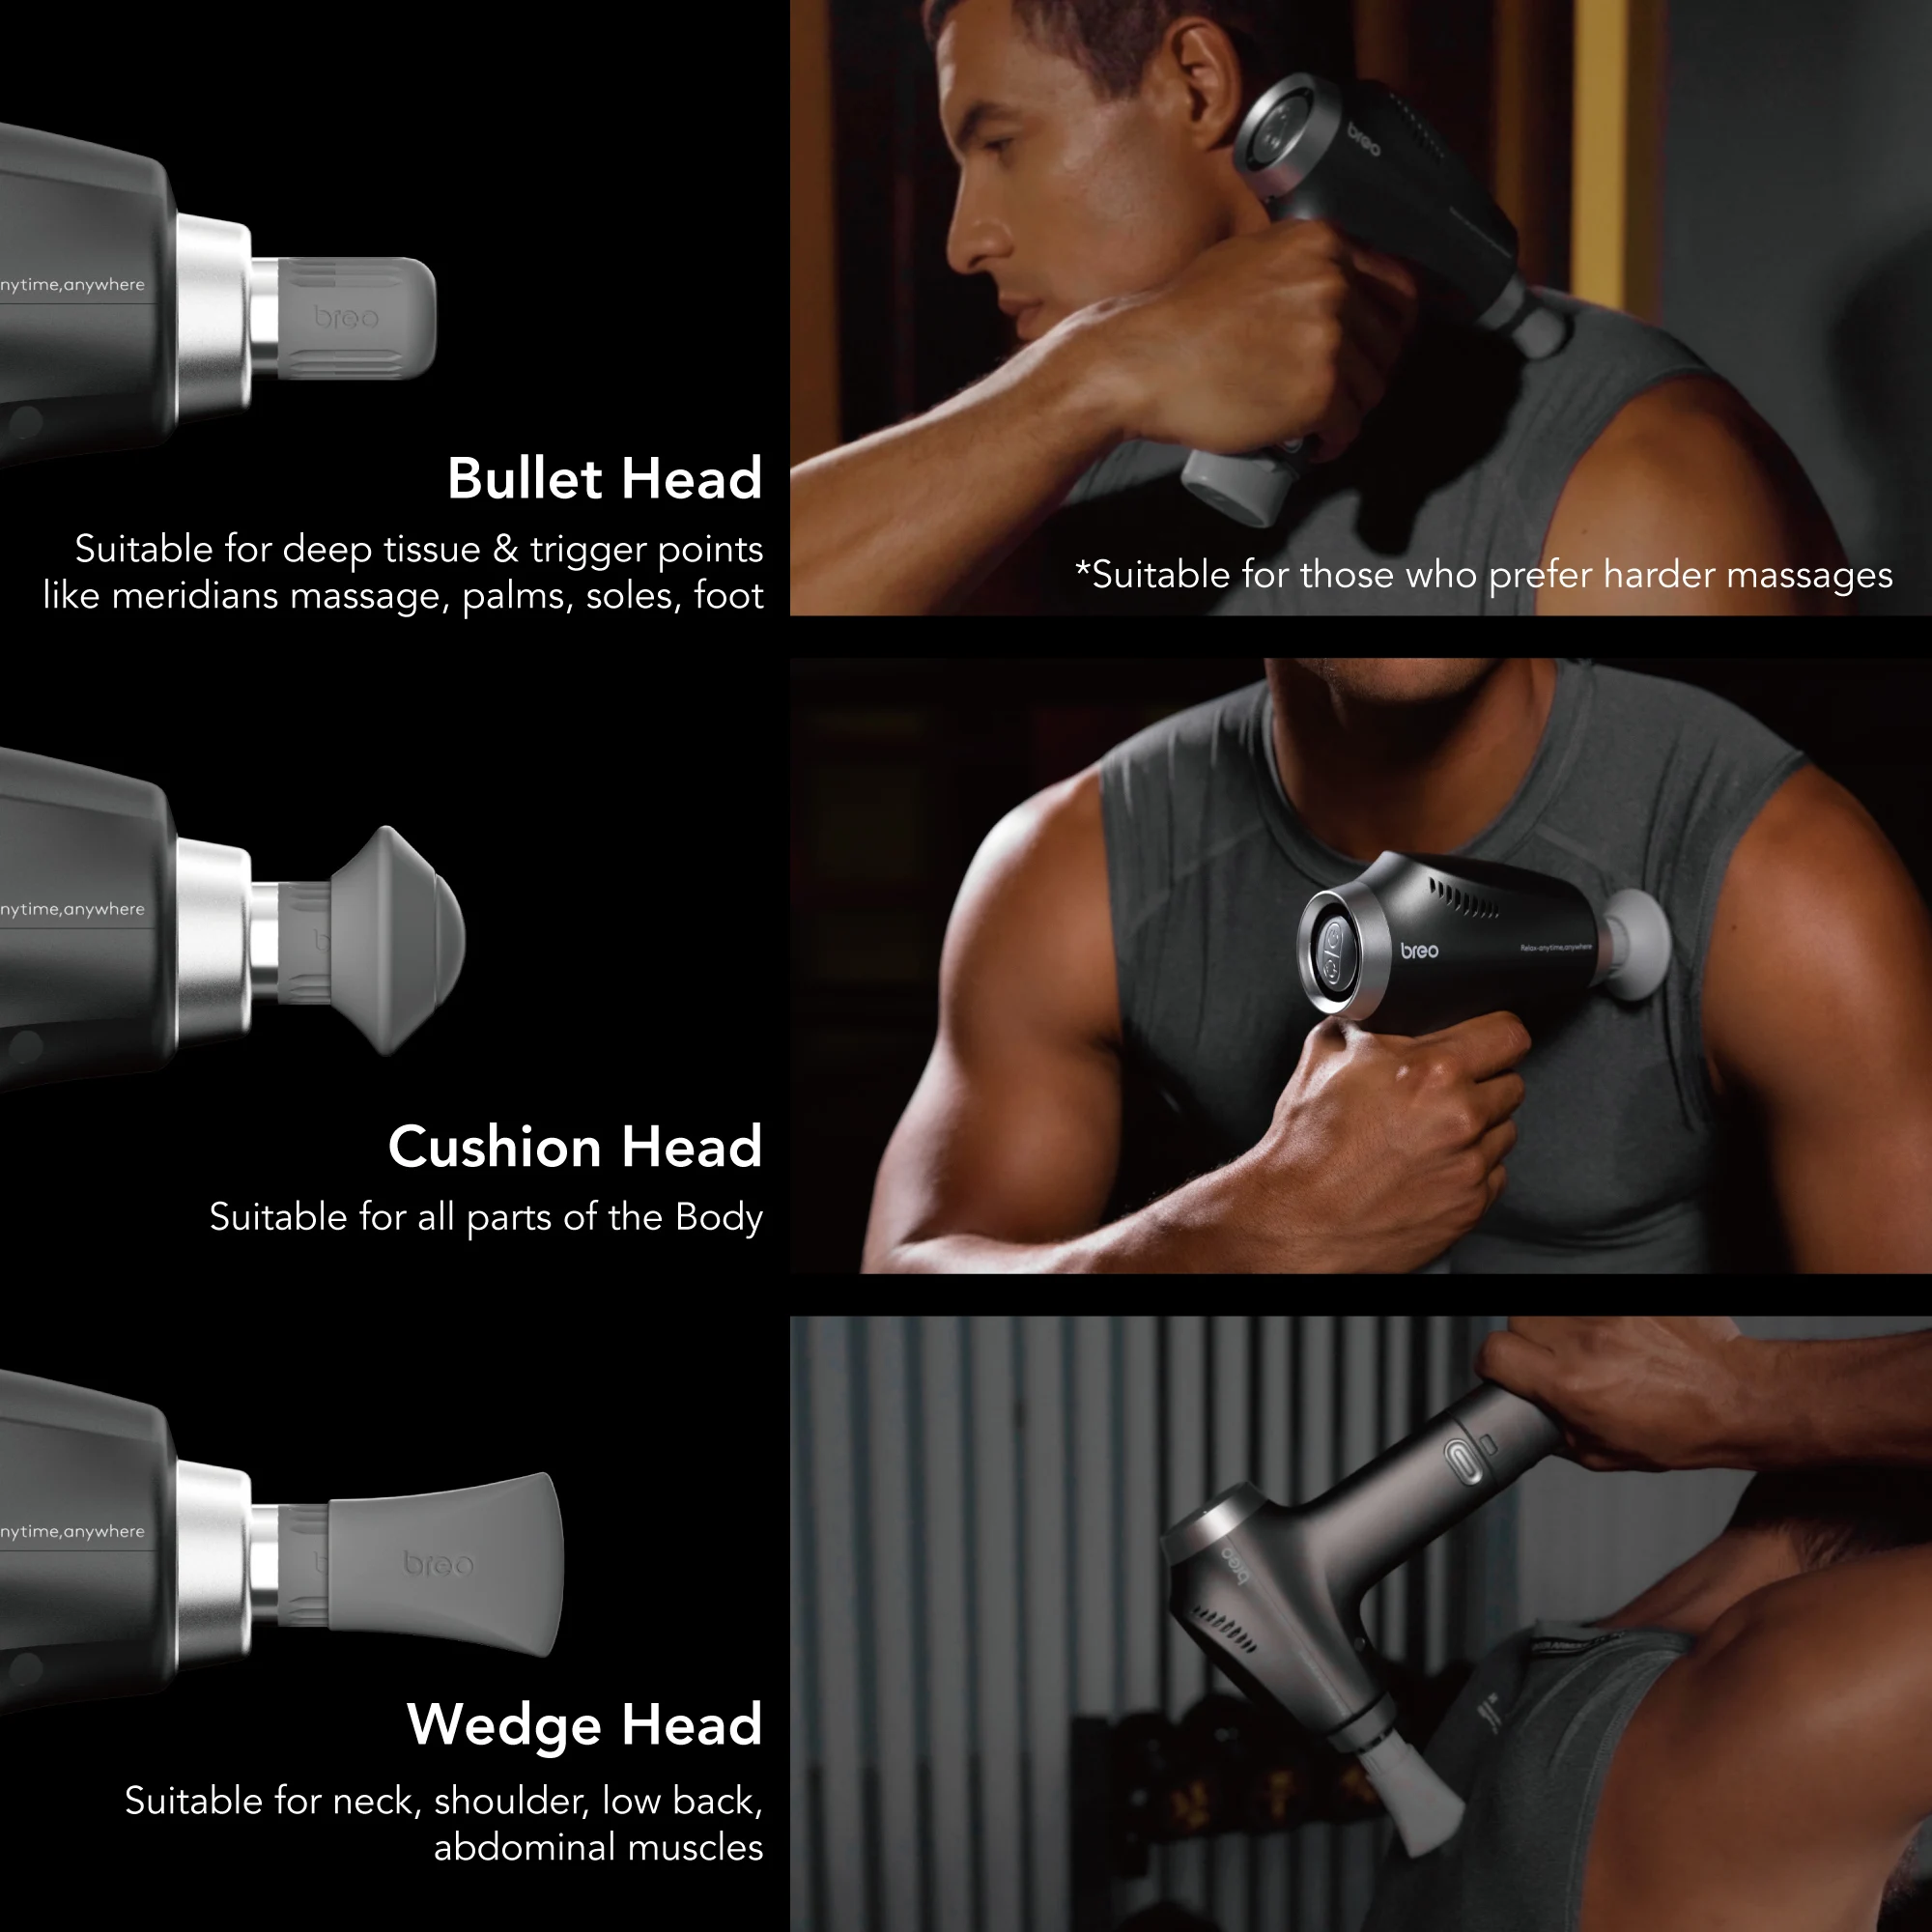 How do you relieve neck and shoulder tension with a Massage gun?